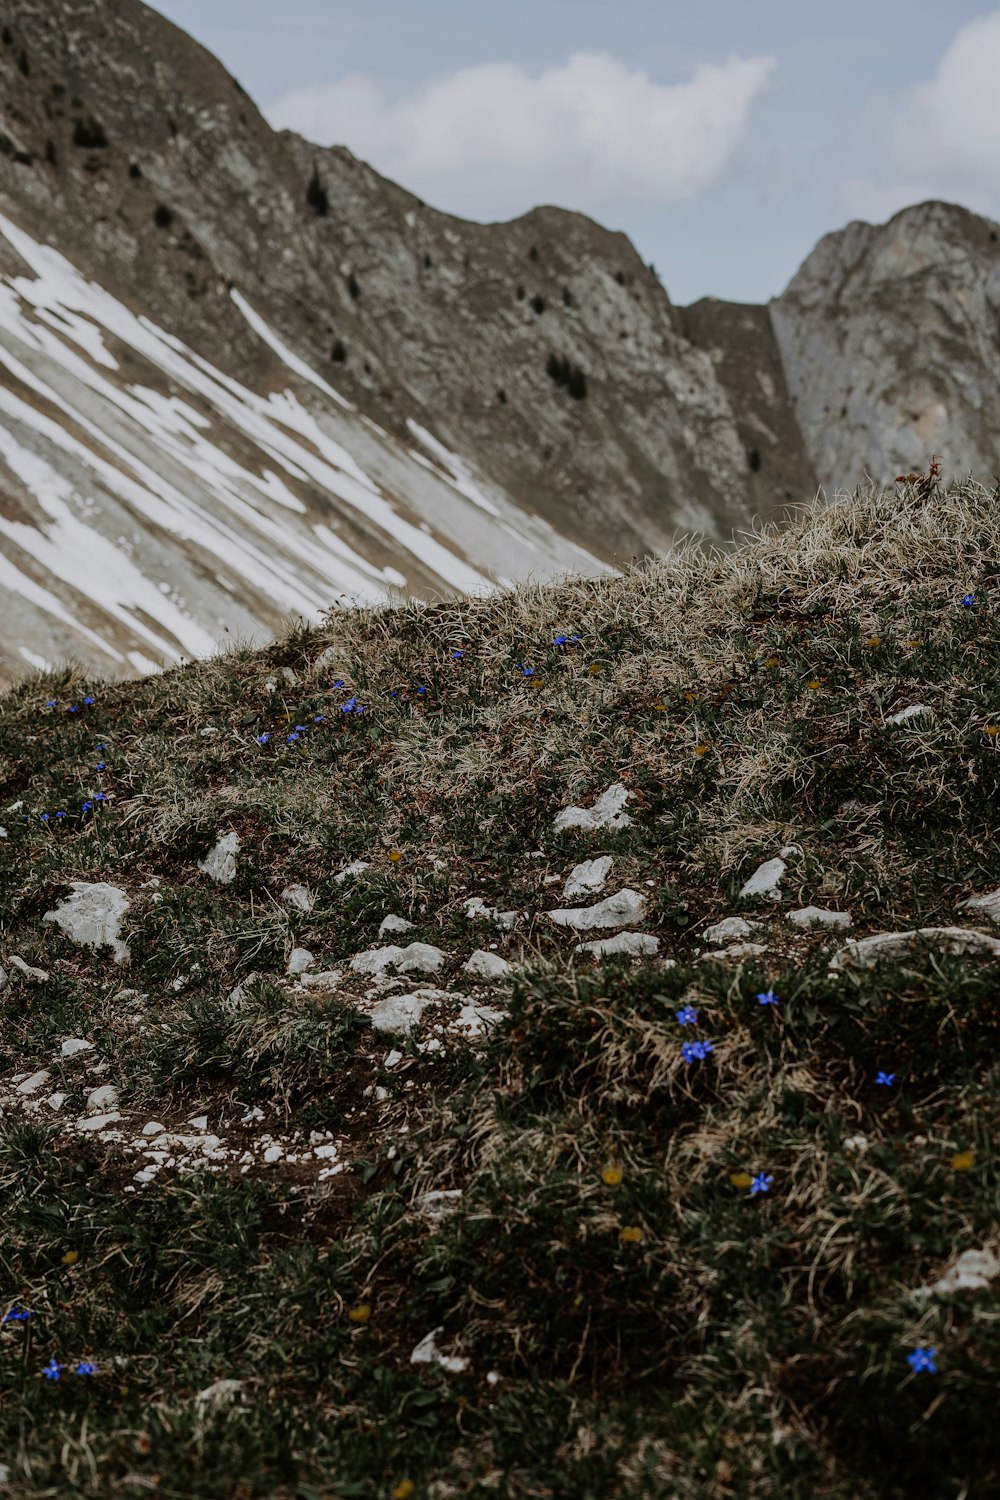 a mountain with snow on it and blue flowers on the ground